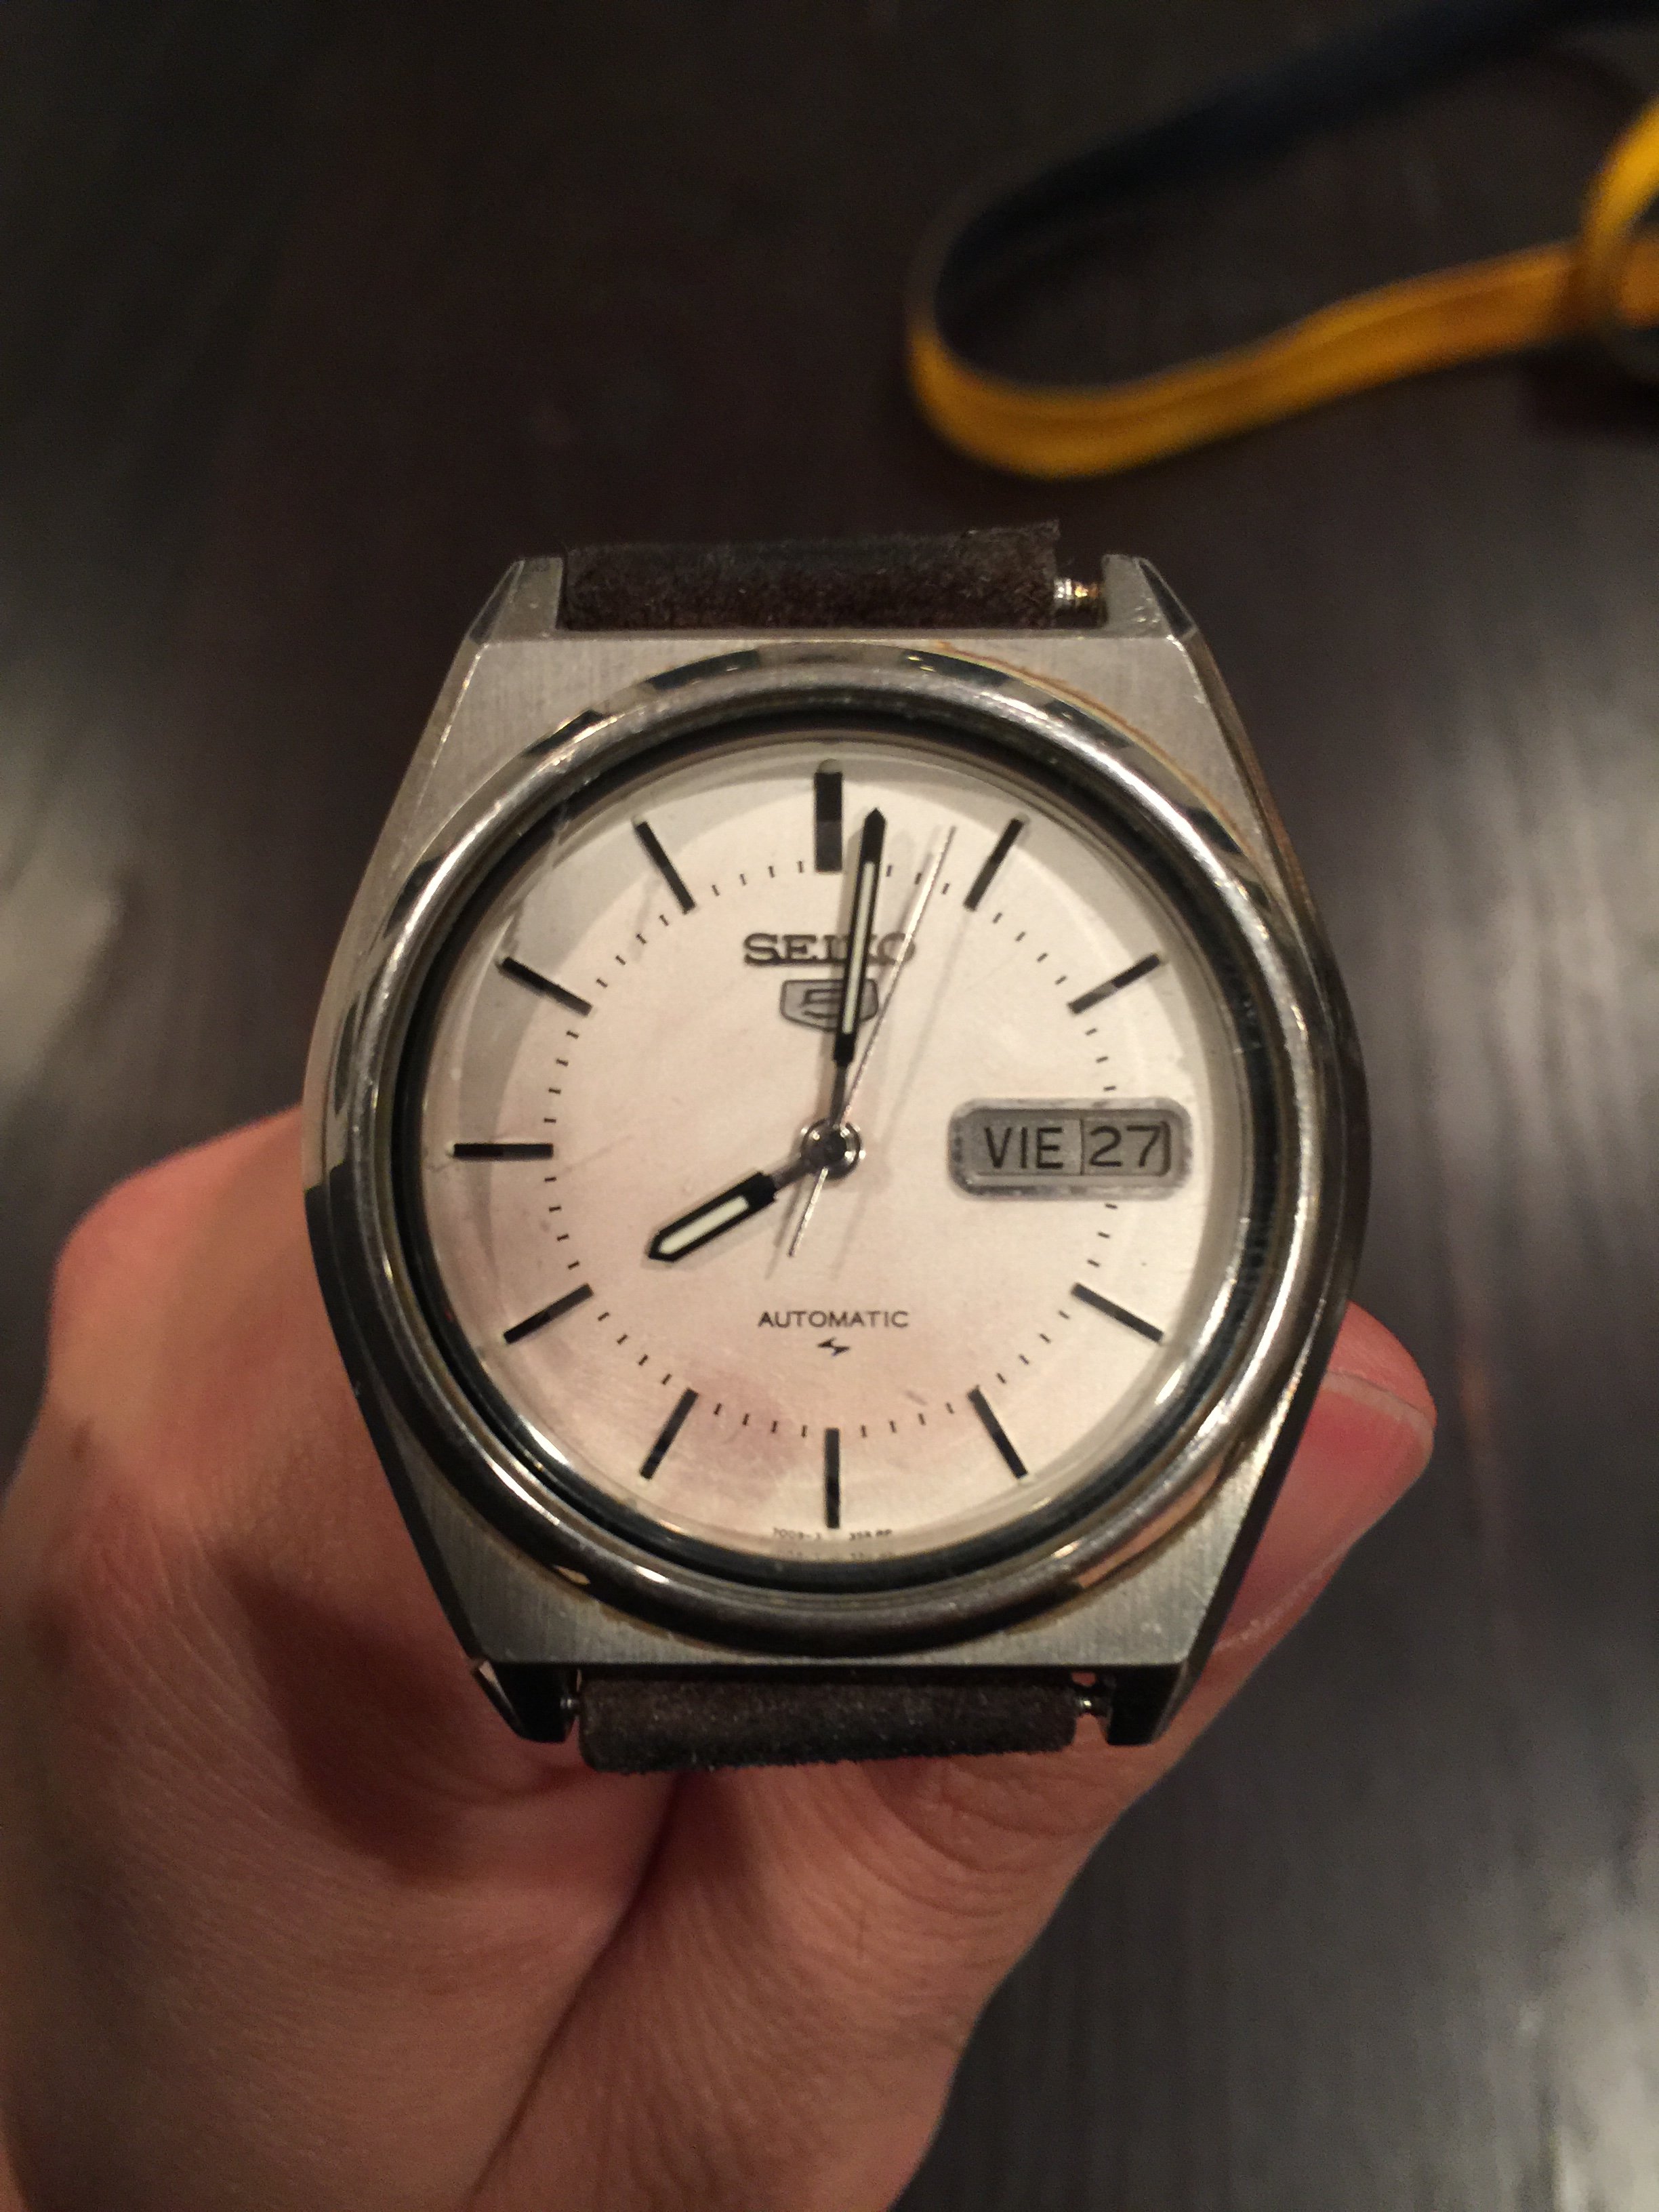 Dating an old Seiko 5 | Omega Forums